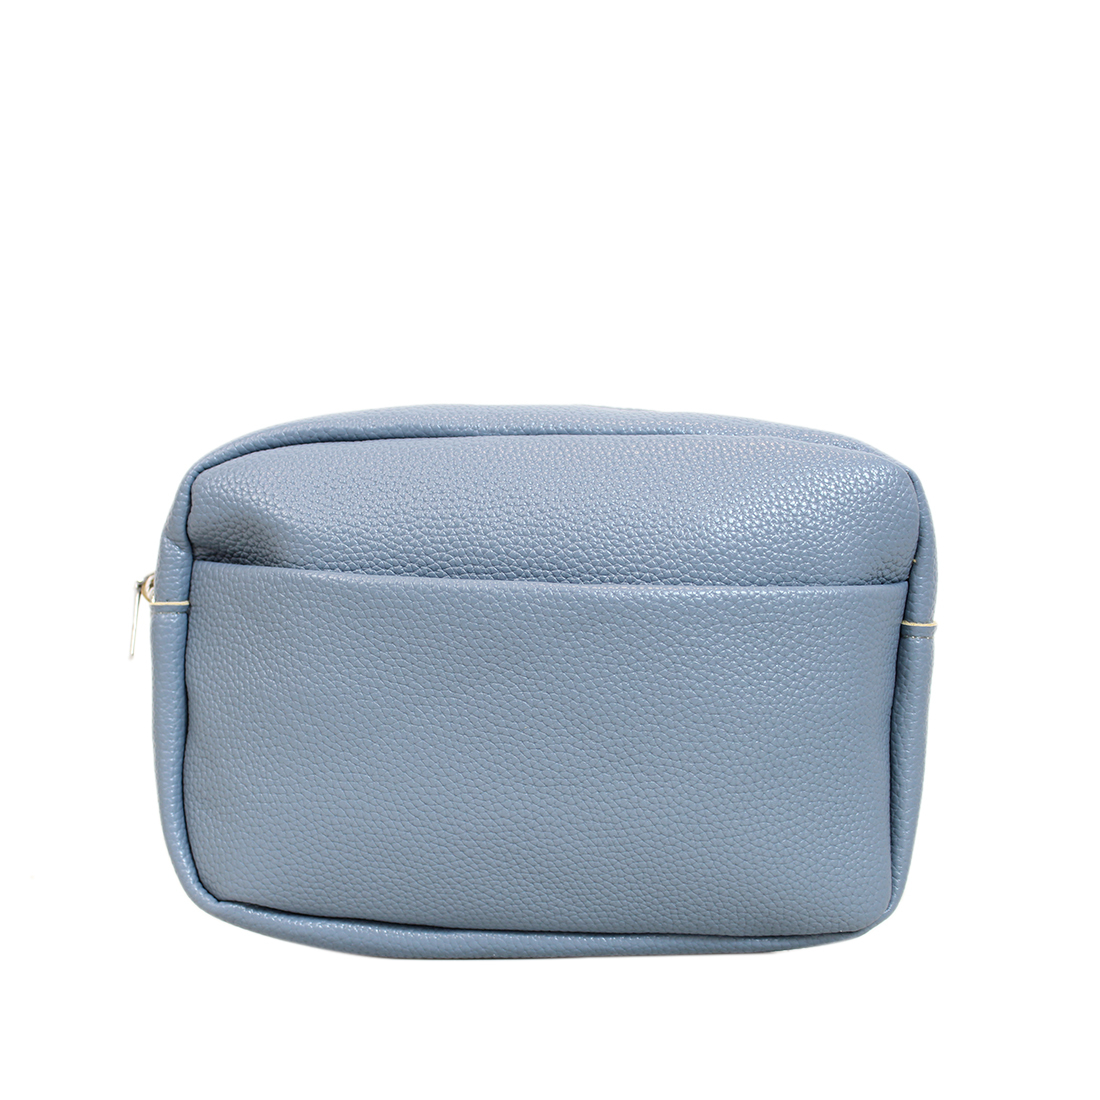 Plain with front pocket and back zip, mixed color strap